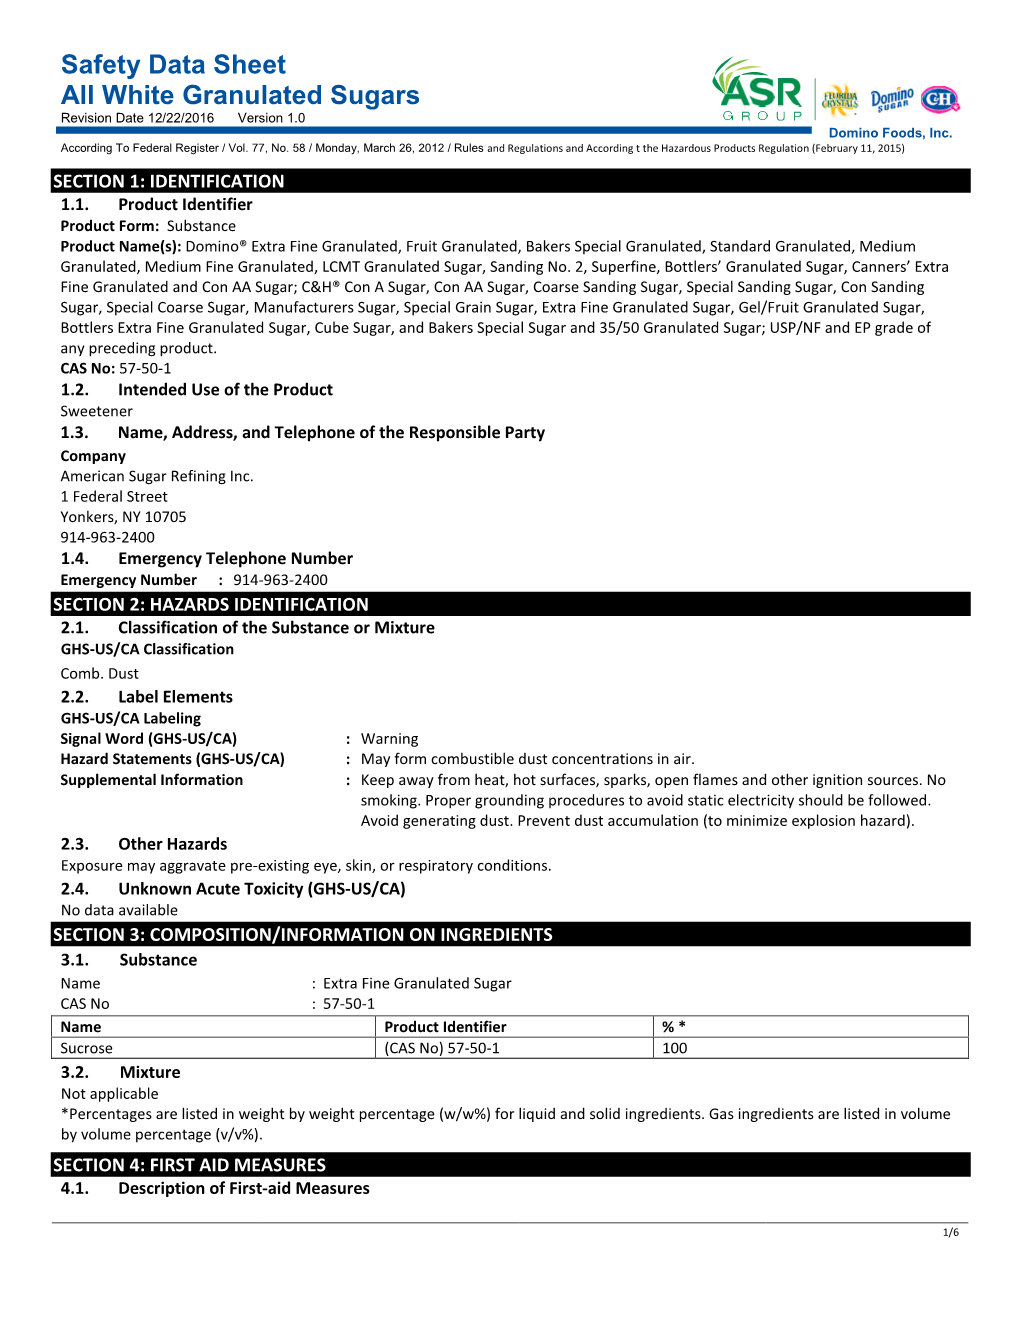 Safety Data Sheet All White Granulated Sugars Revision Date 12/22/2016 Version 1.0 Domino Foods, Inc